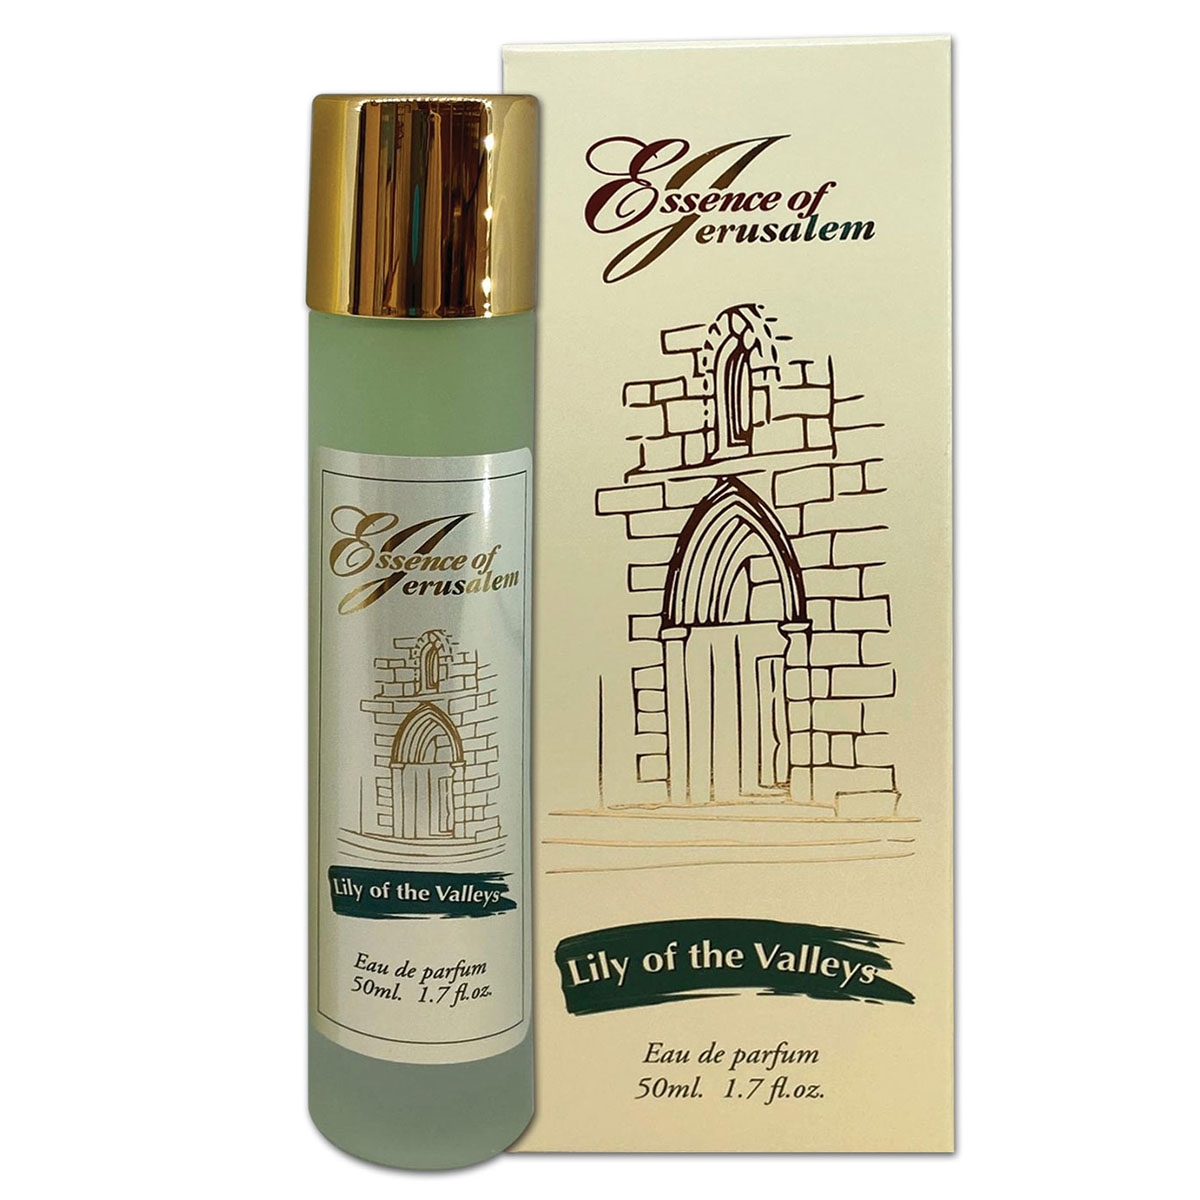 Ein Gedi Essence of Jerusalem Lily of the Valley Perfume - 1